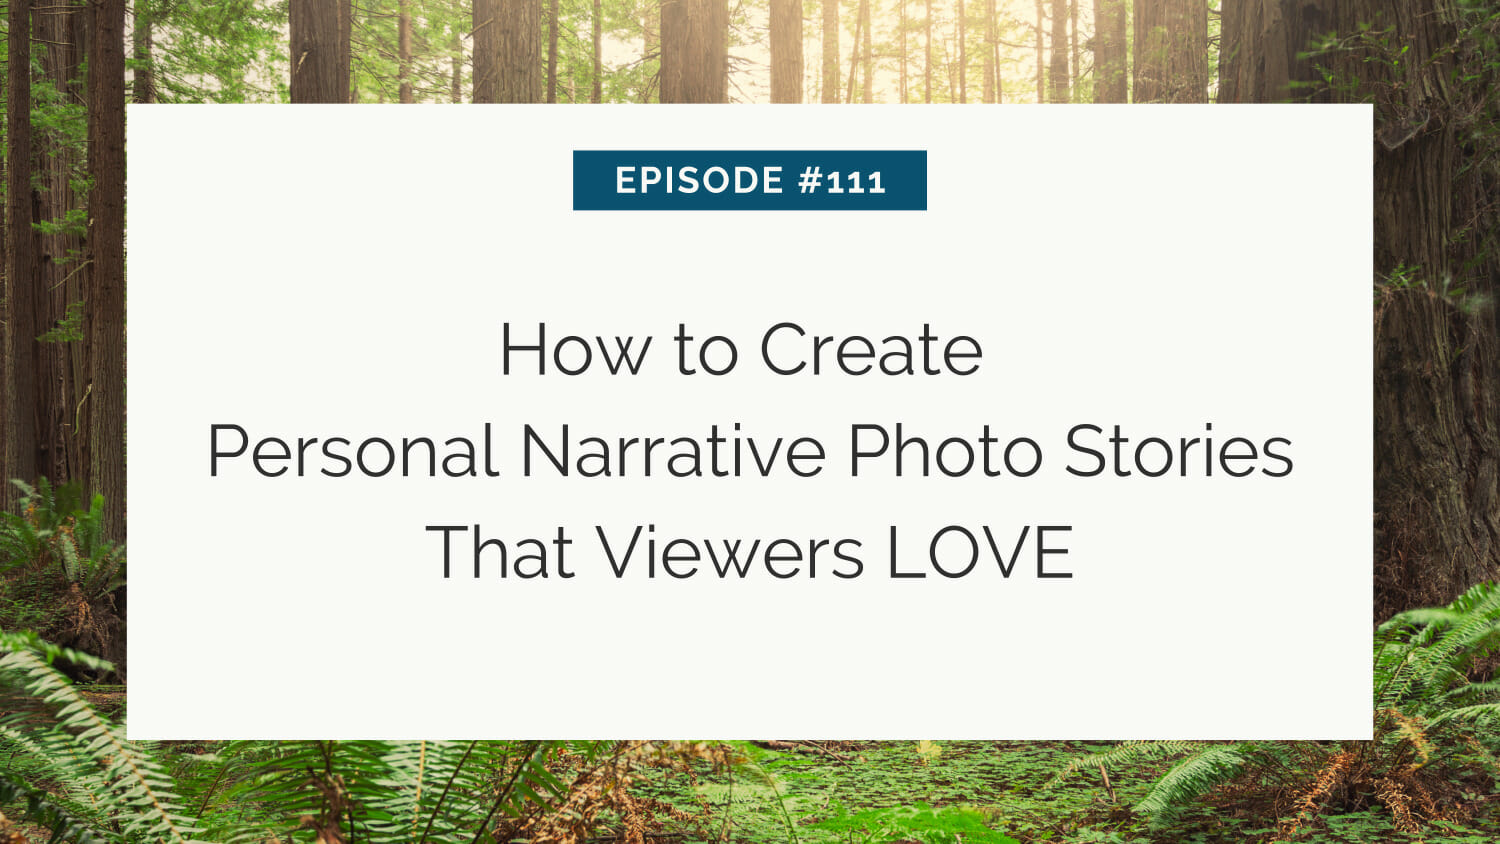 A promotional graphic for episode #111 titled "how to create personal narrative photo stories that viewers love," set against a forest backdrop.